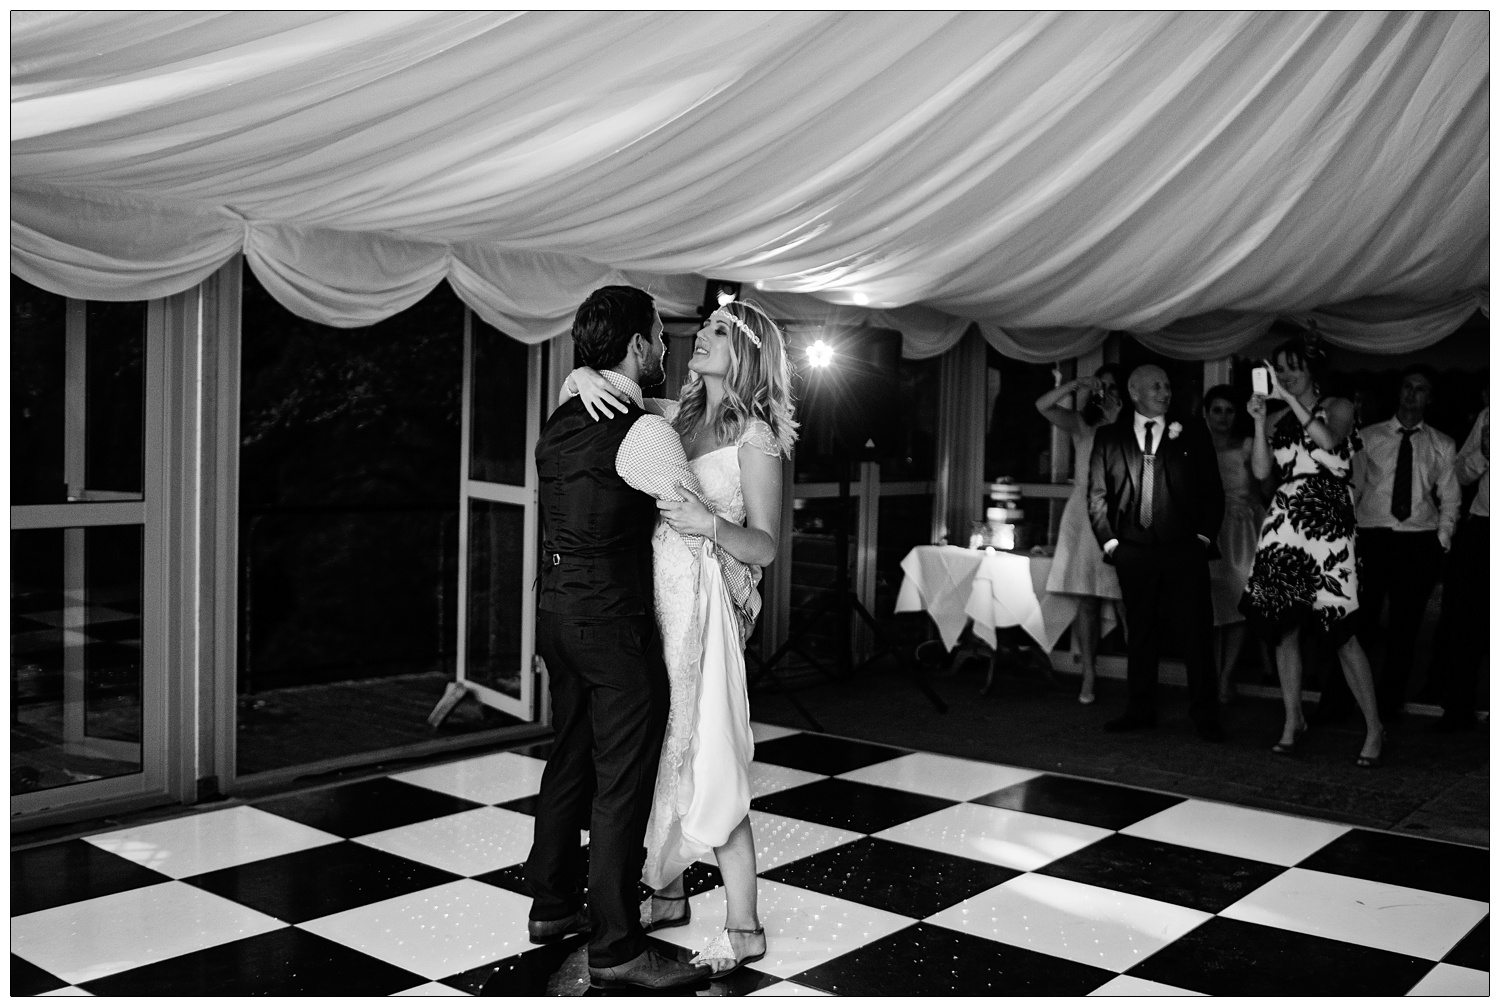 Bride and groom on the black and white chequered floor of a marquee. They are at the Inn at Whitewell having their first dance.